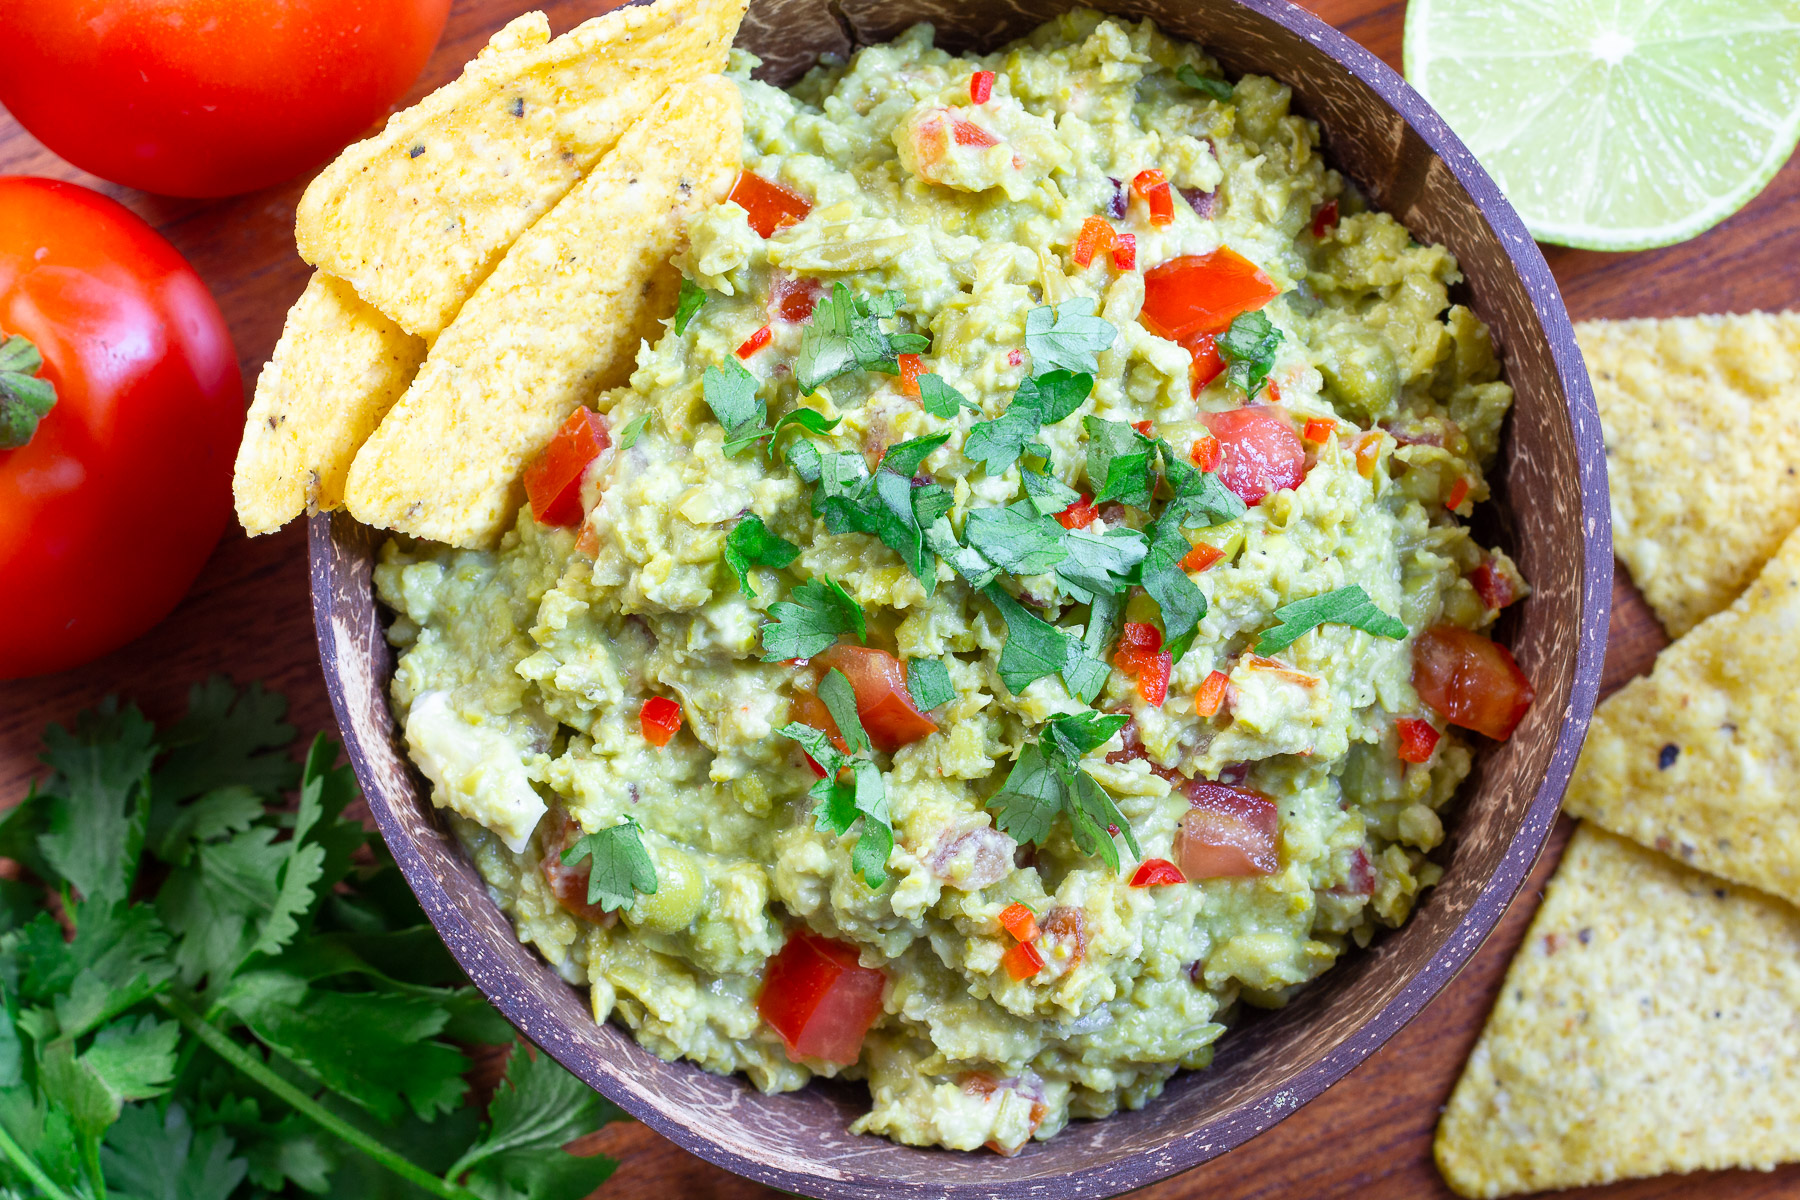 Green Pea Guacamole – Completely Without Avocado